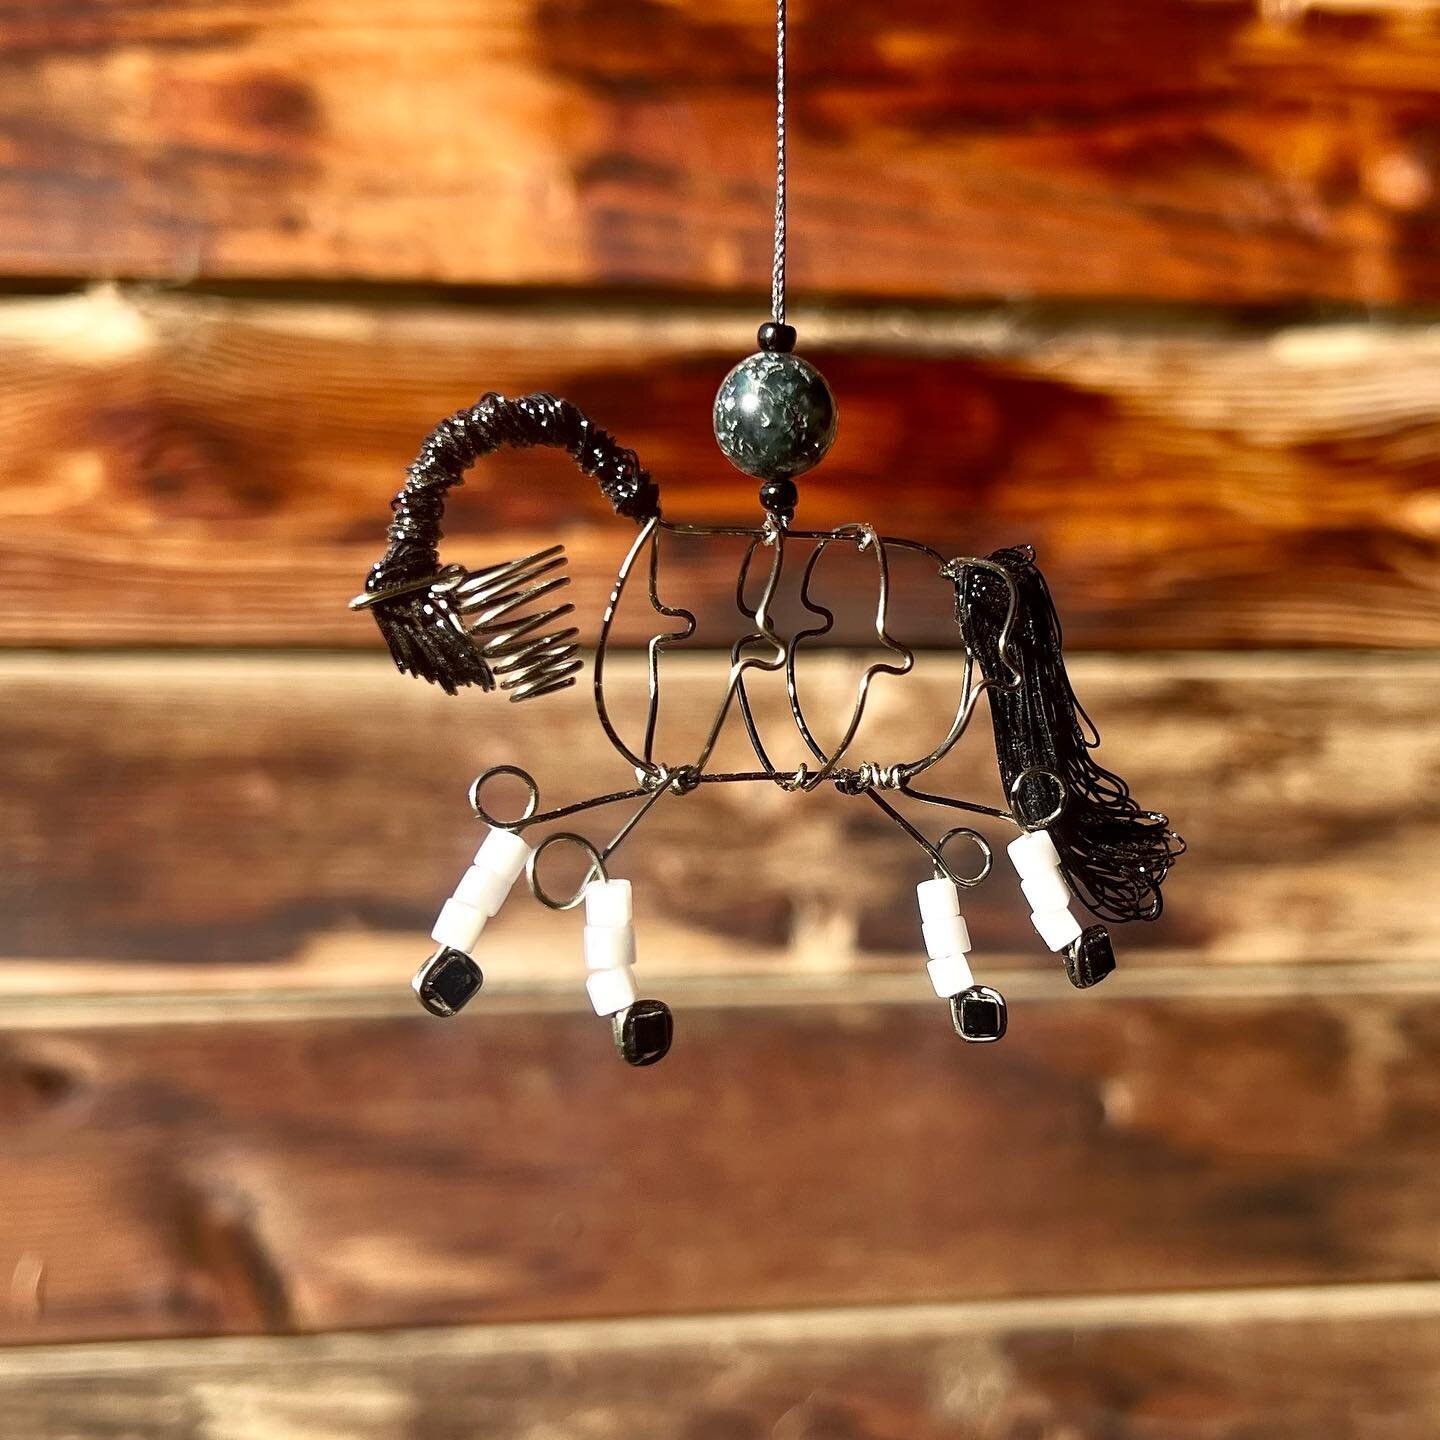 Arrow is available in the Sale Barn!
www.livewireart.com
#horsegifts #livewirehorses #horsegiftideas #shopsmall #smallbusiness